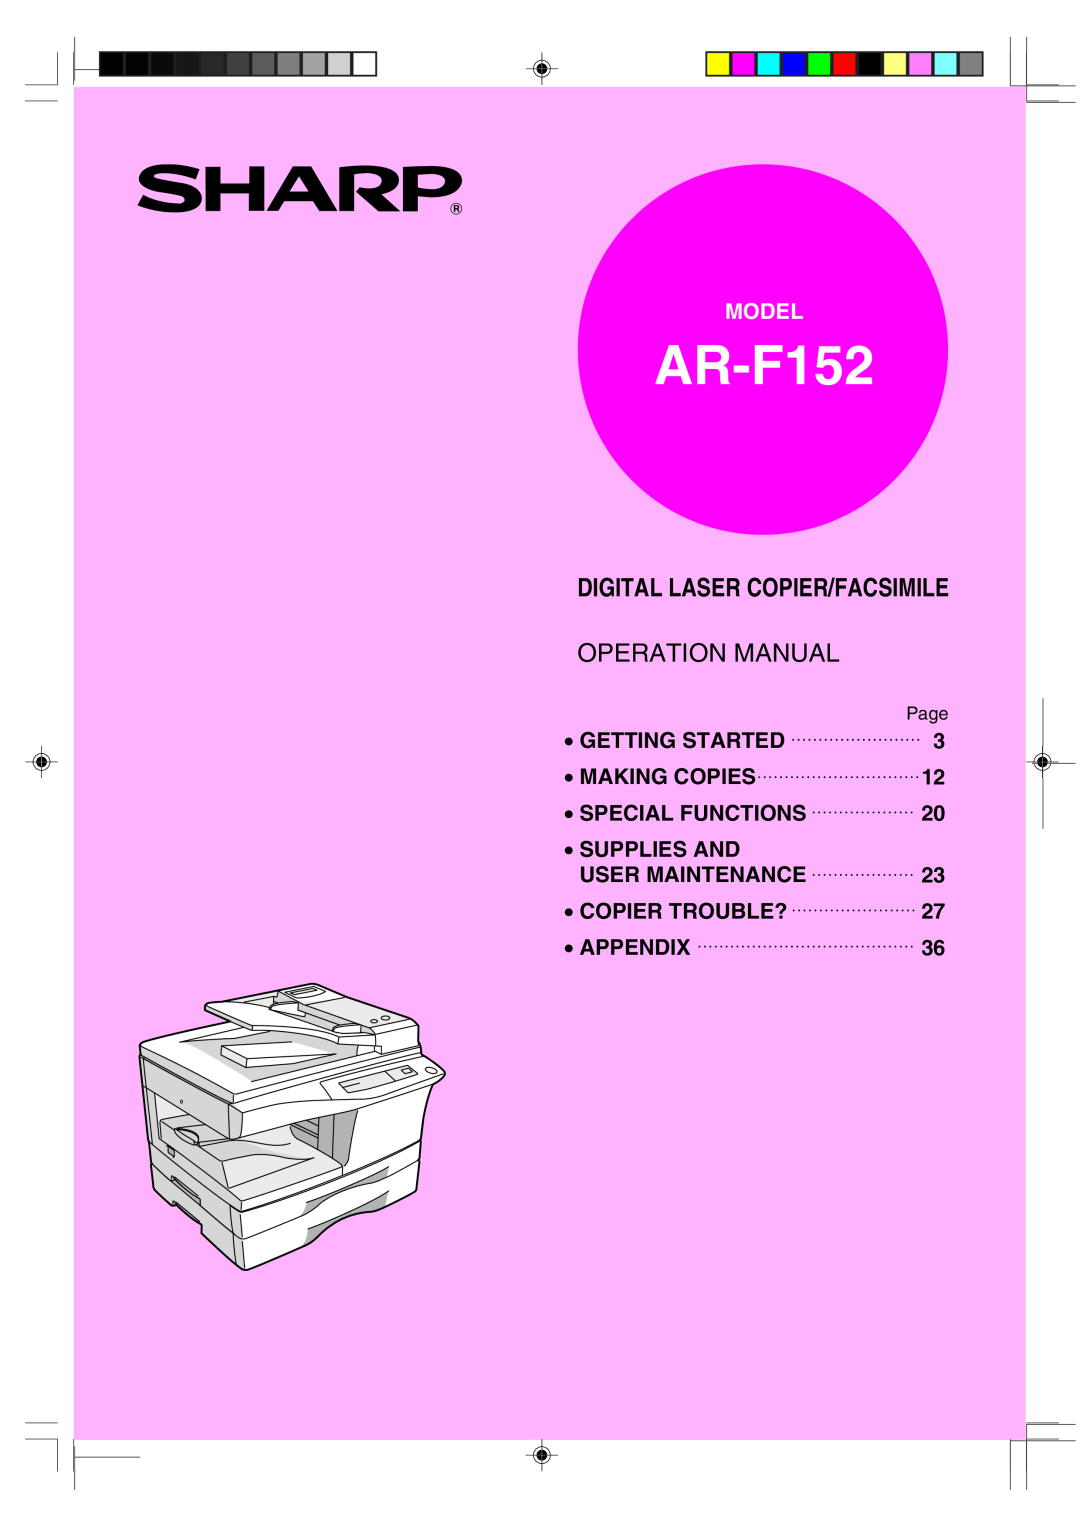 Sharp AR-F152 operation manual Digital Laser Copier/Facsimile, Model, Getting Started, Making Copies, Special Functions 